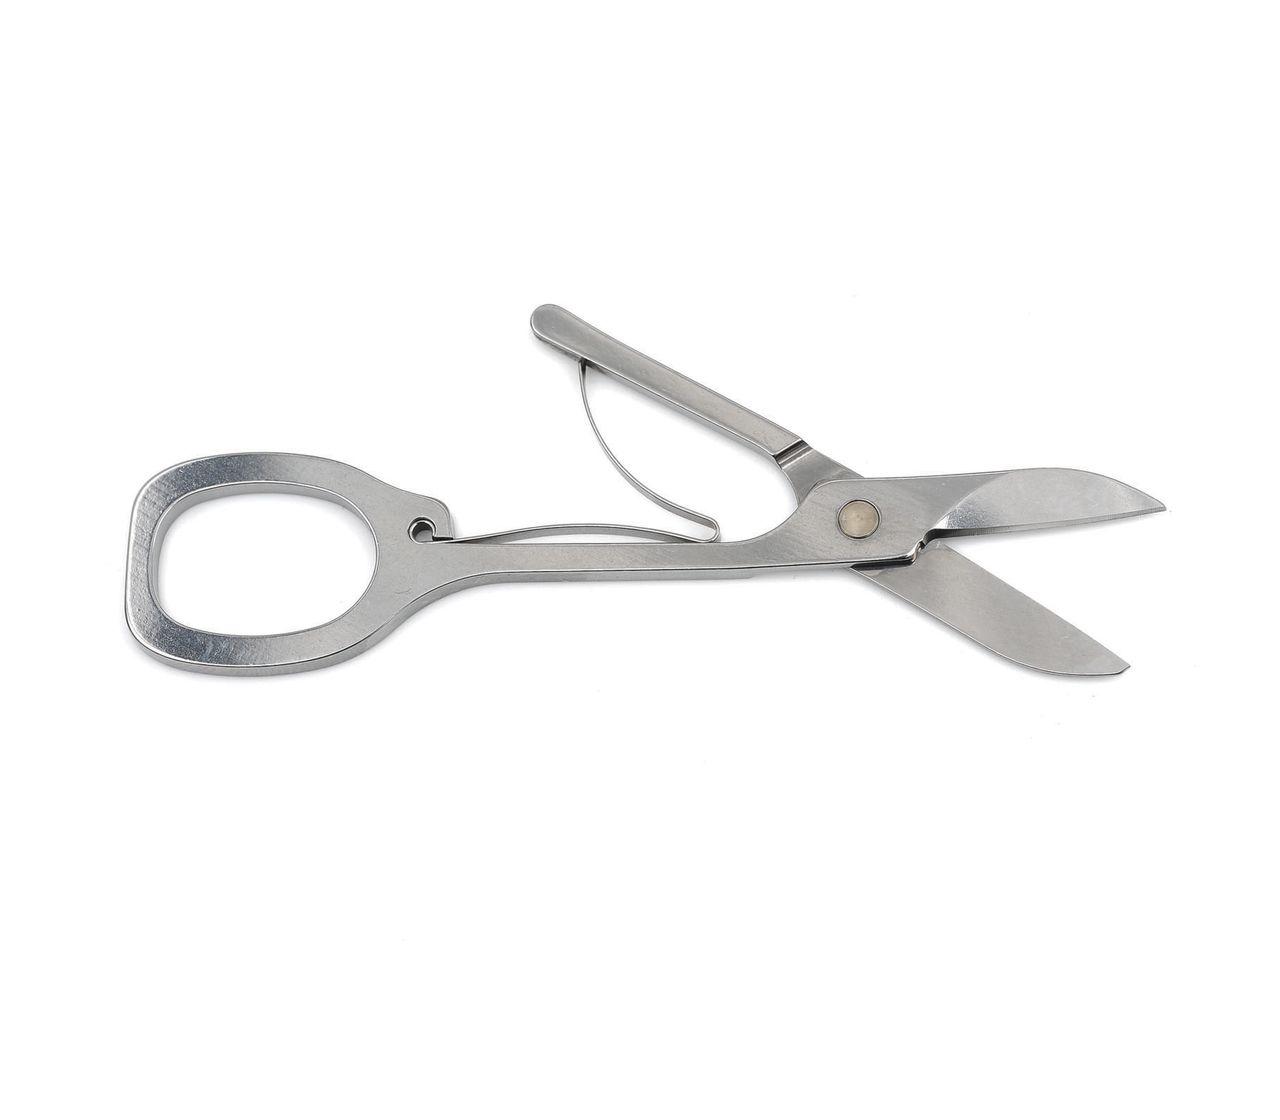 Check this out:Replacement Scissors for Swiss Card